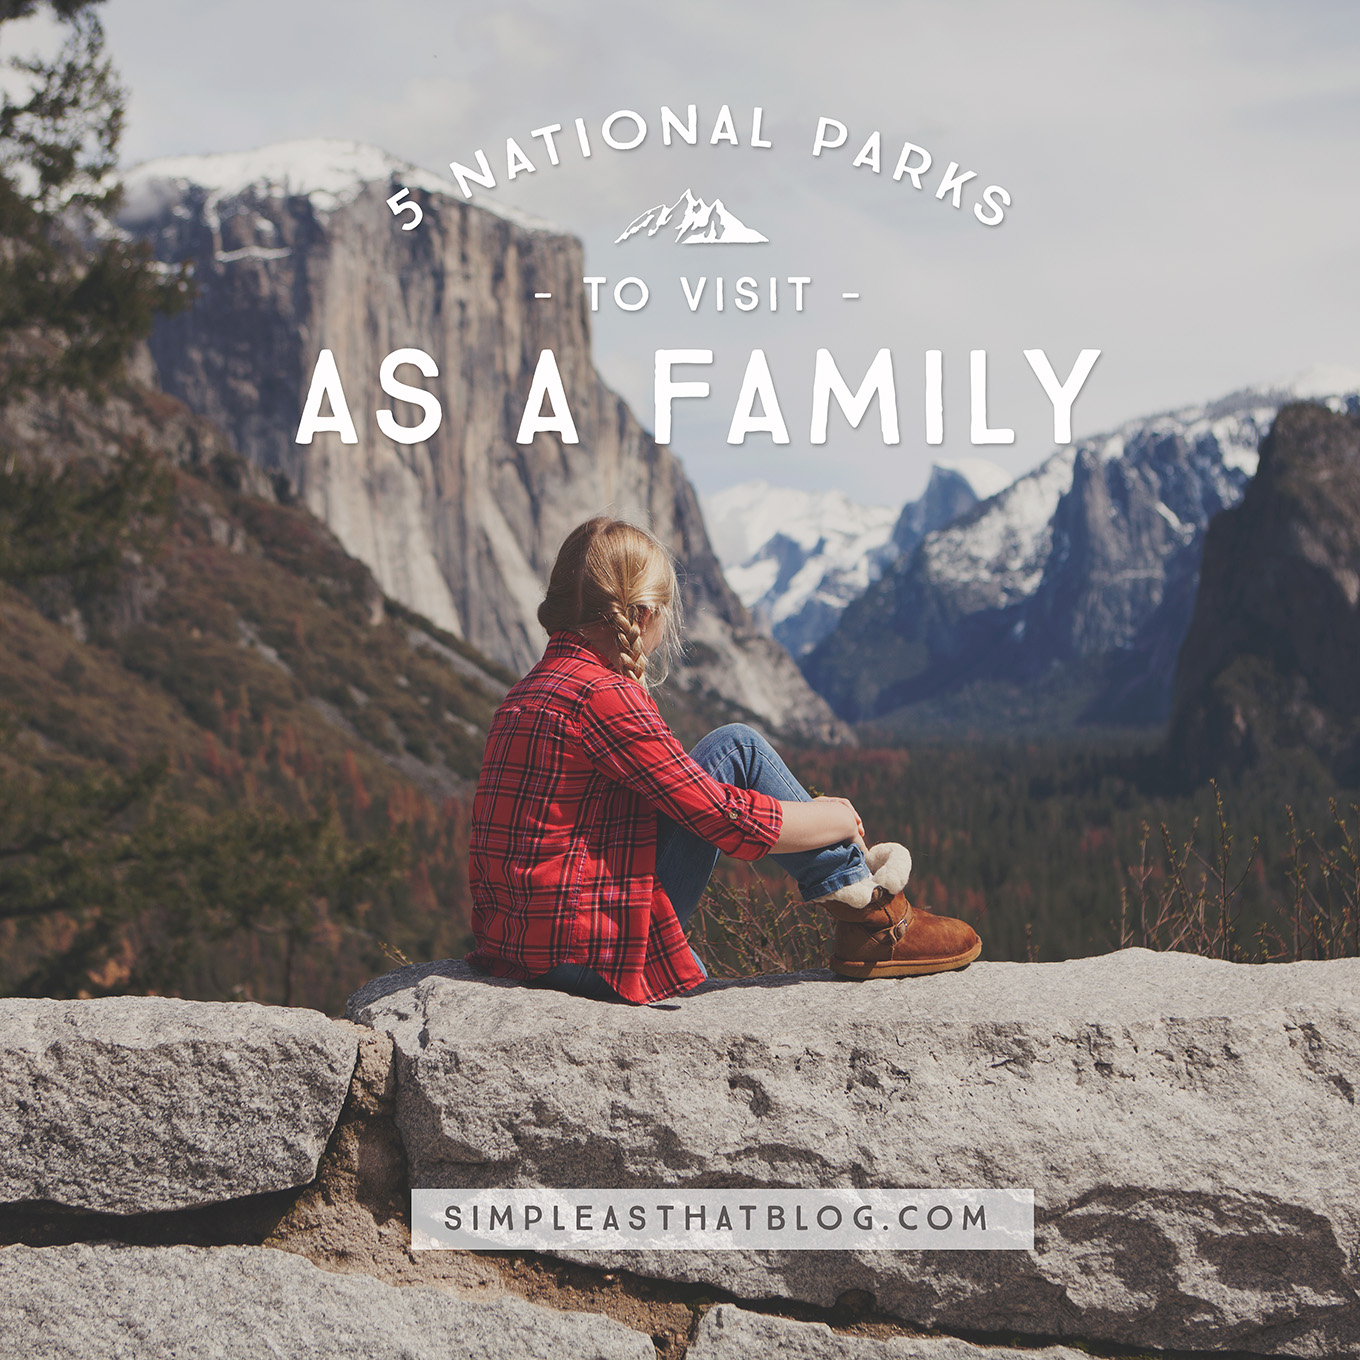 If you're looking for a national park to visit, here are five parks our family has explored and come to love, as well as some trails and sights to enjoy while you're there.